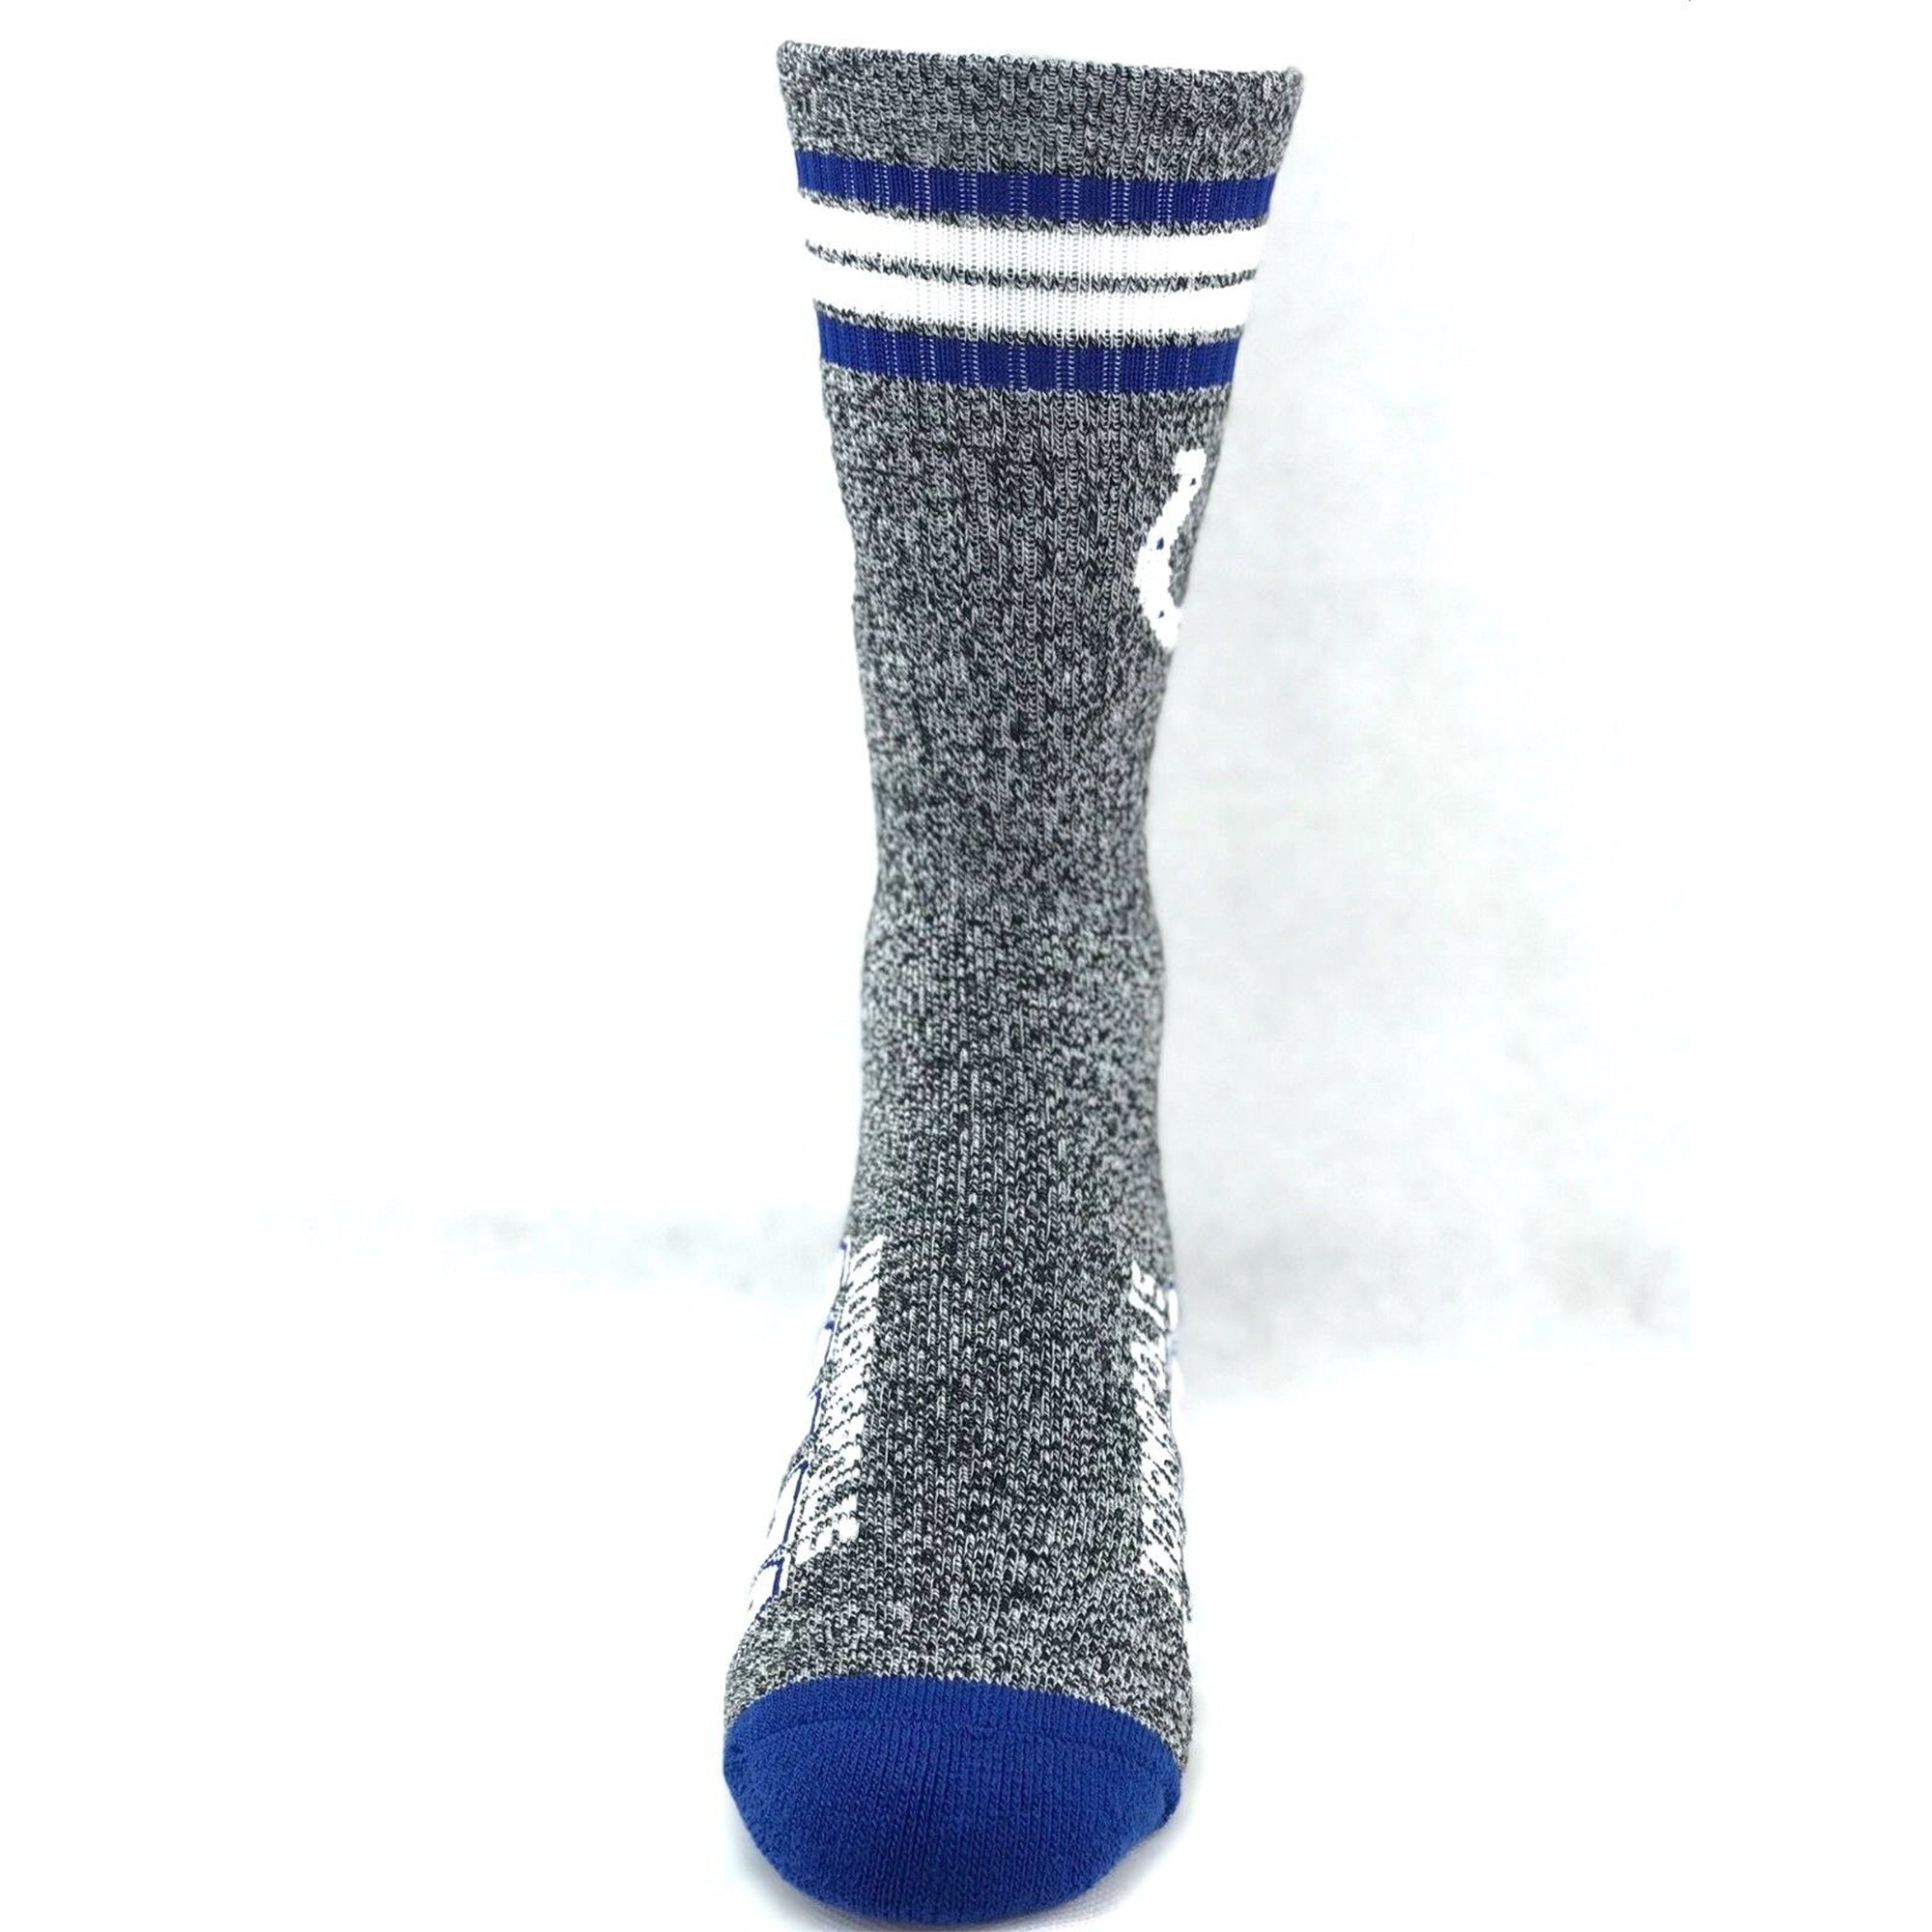 For Bare Feet Men Indianapolis Colts Socks (Colts)-Colts-Large-Nexus Clothing